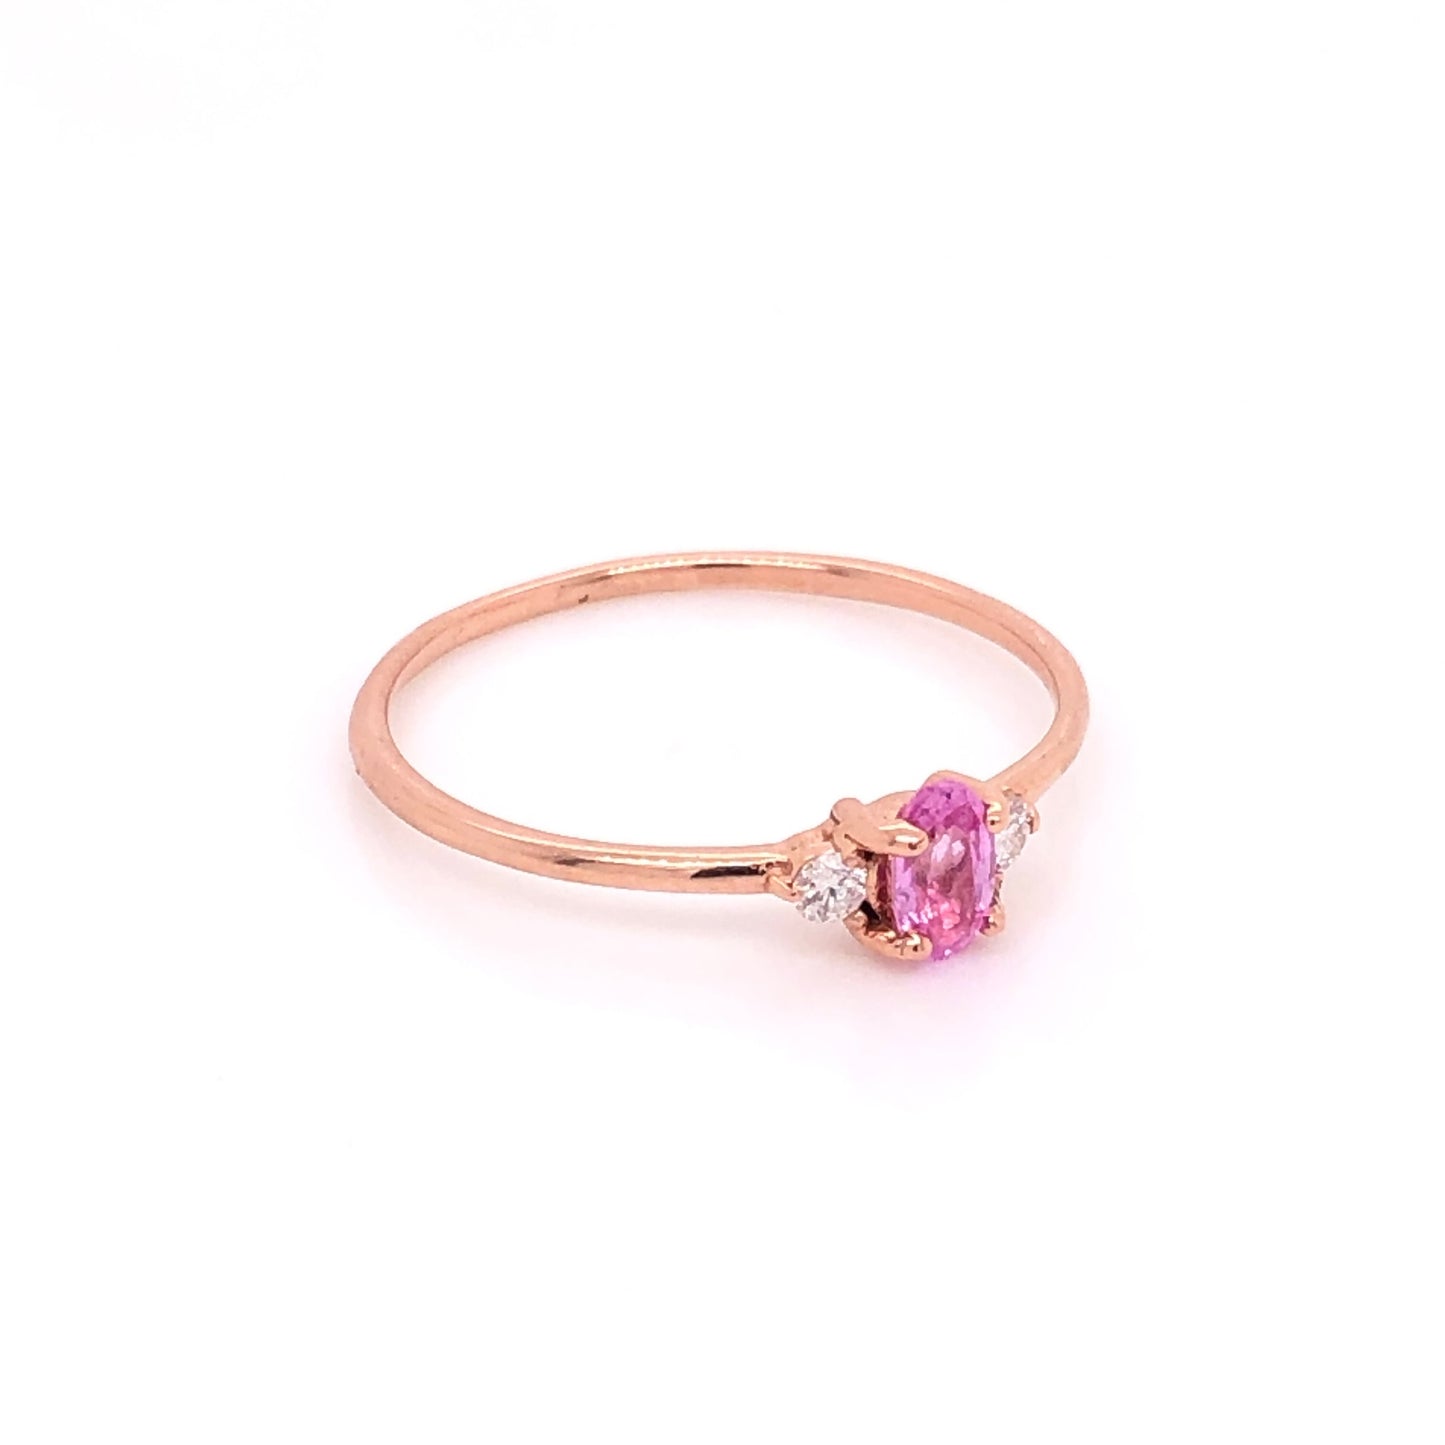 IMMEDIATE DELIVERY / Angie Ring with Pink Sapphire / 14k Rose Gold / Size 5